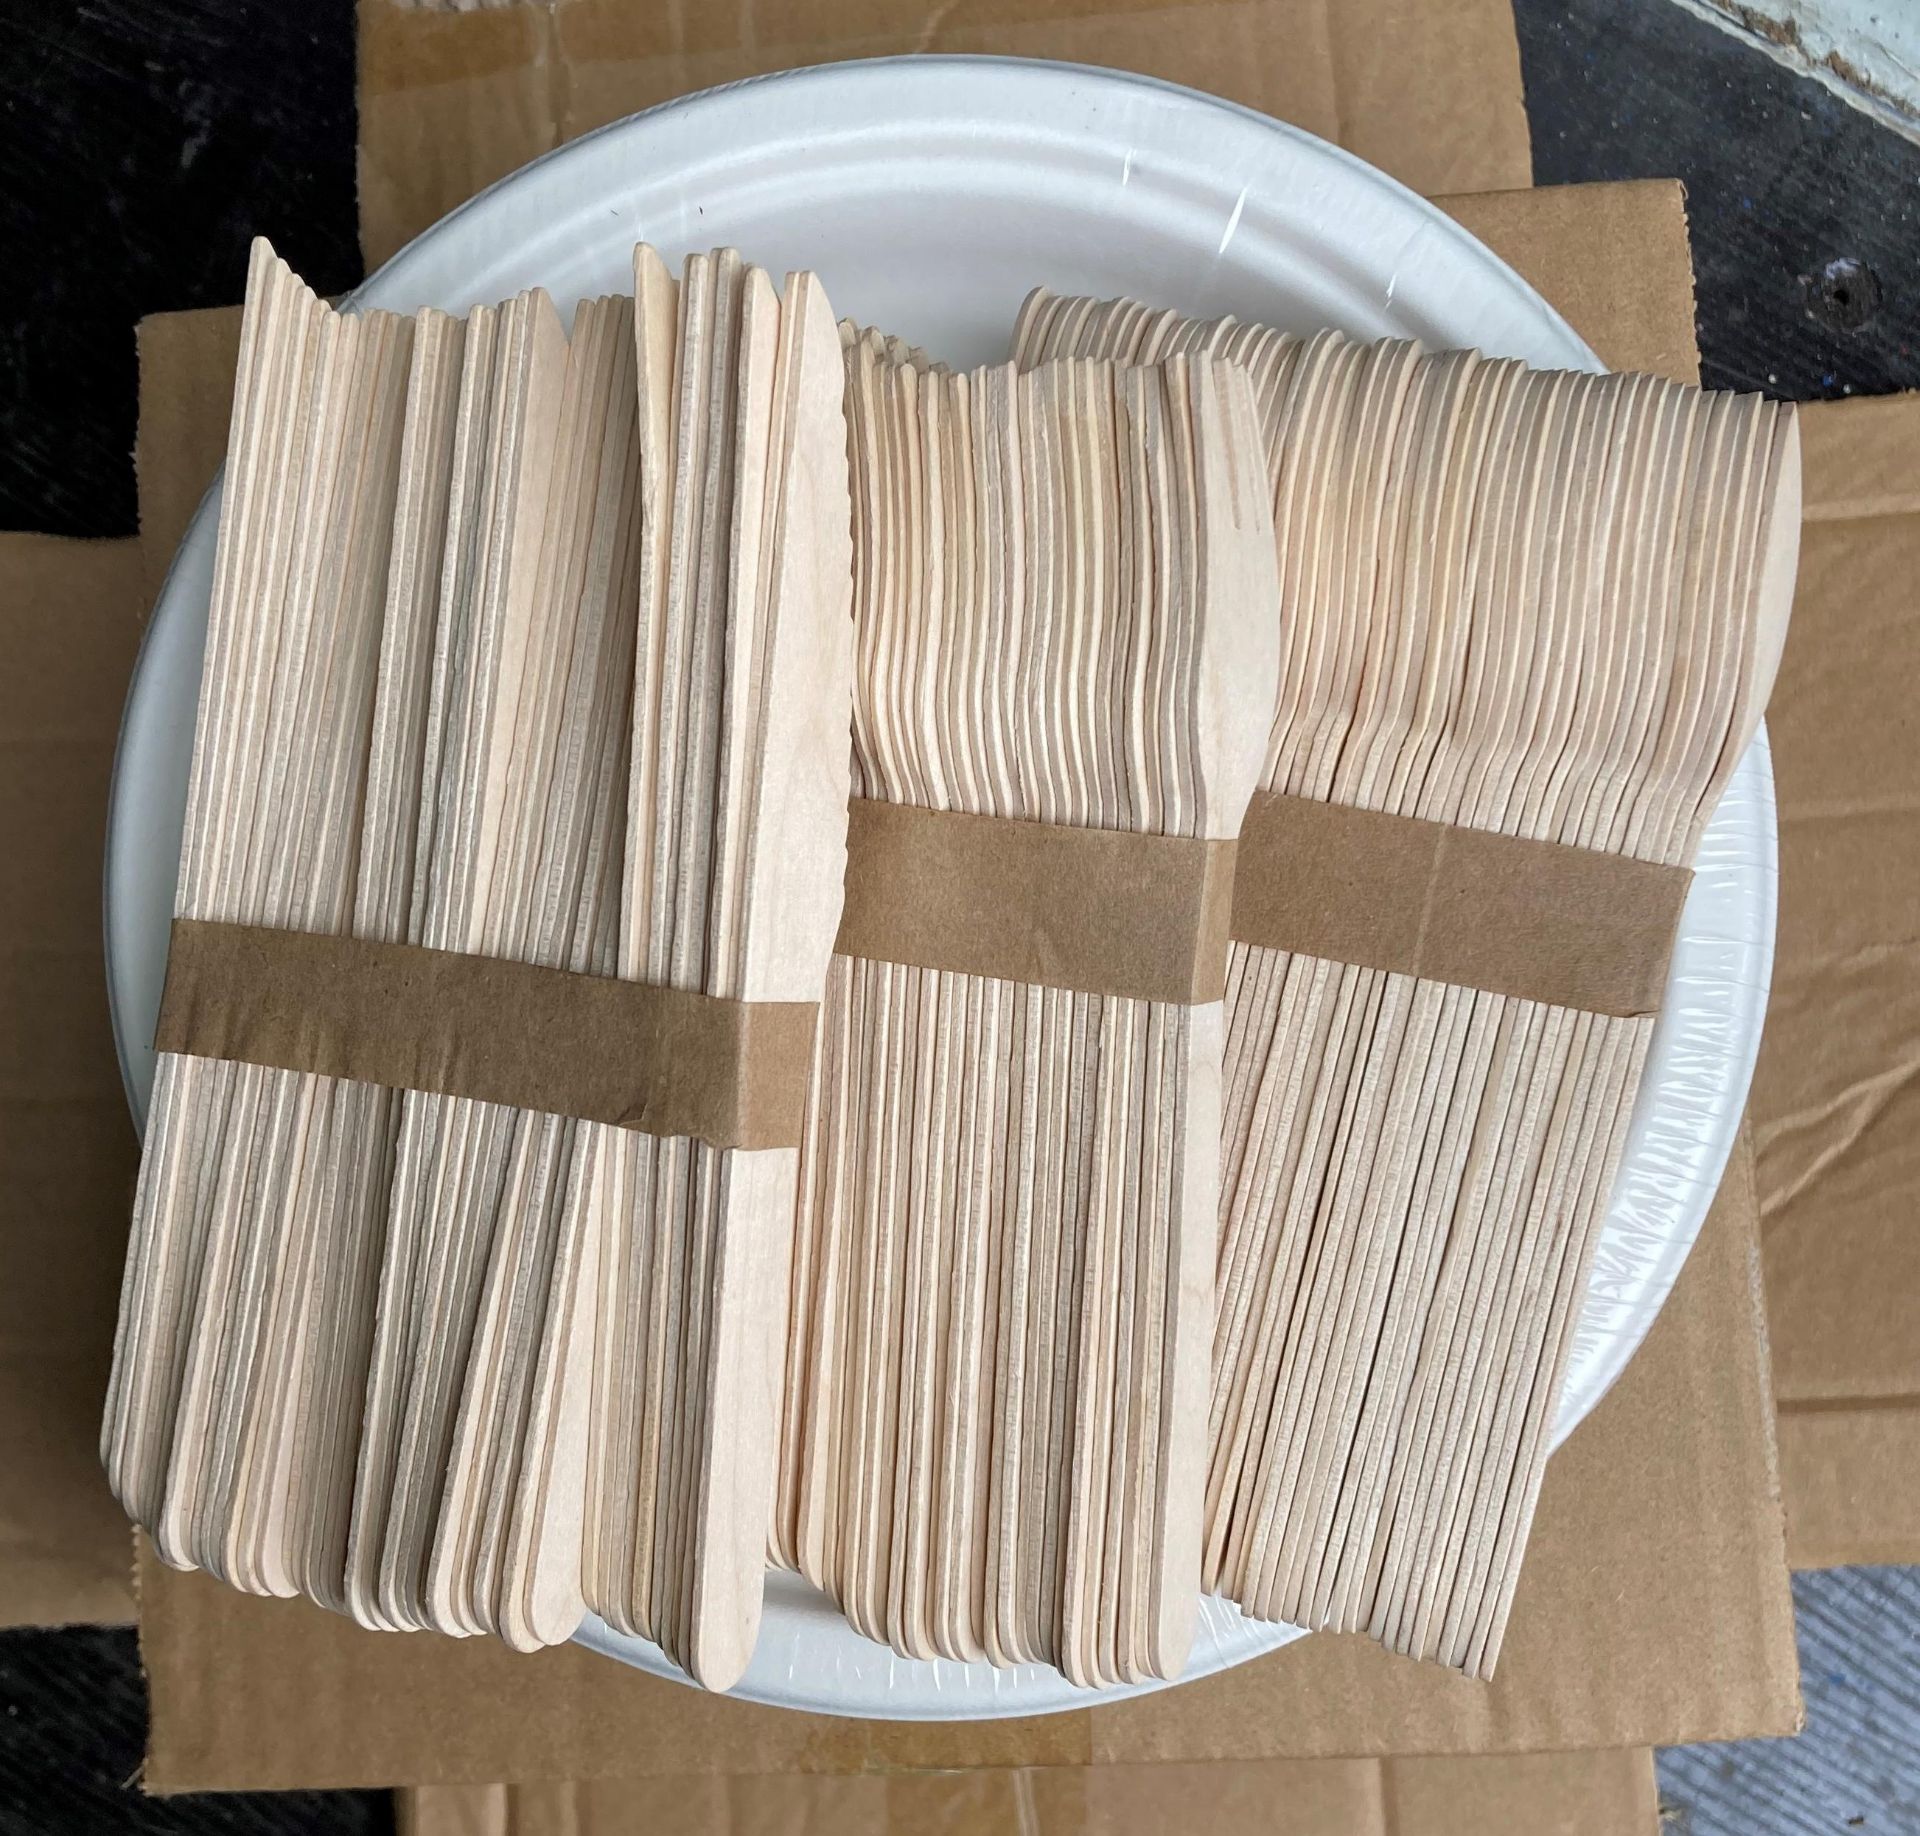 60 x packs and contents of approximately 60 x paper plates, sets of wooden knives, - Image 3 of 5